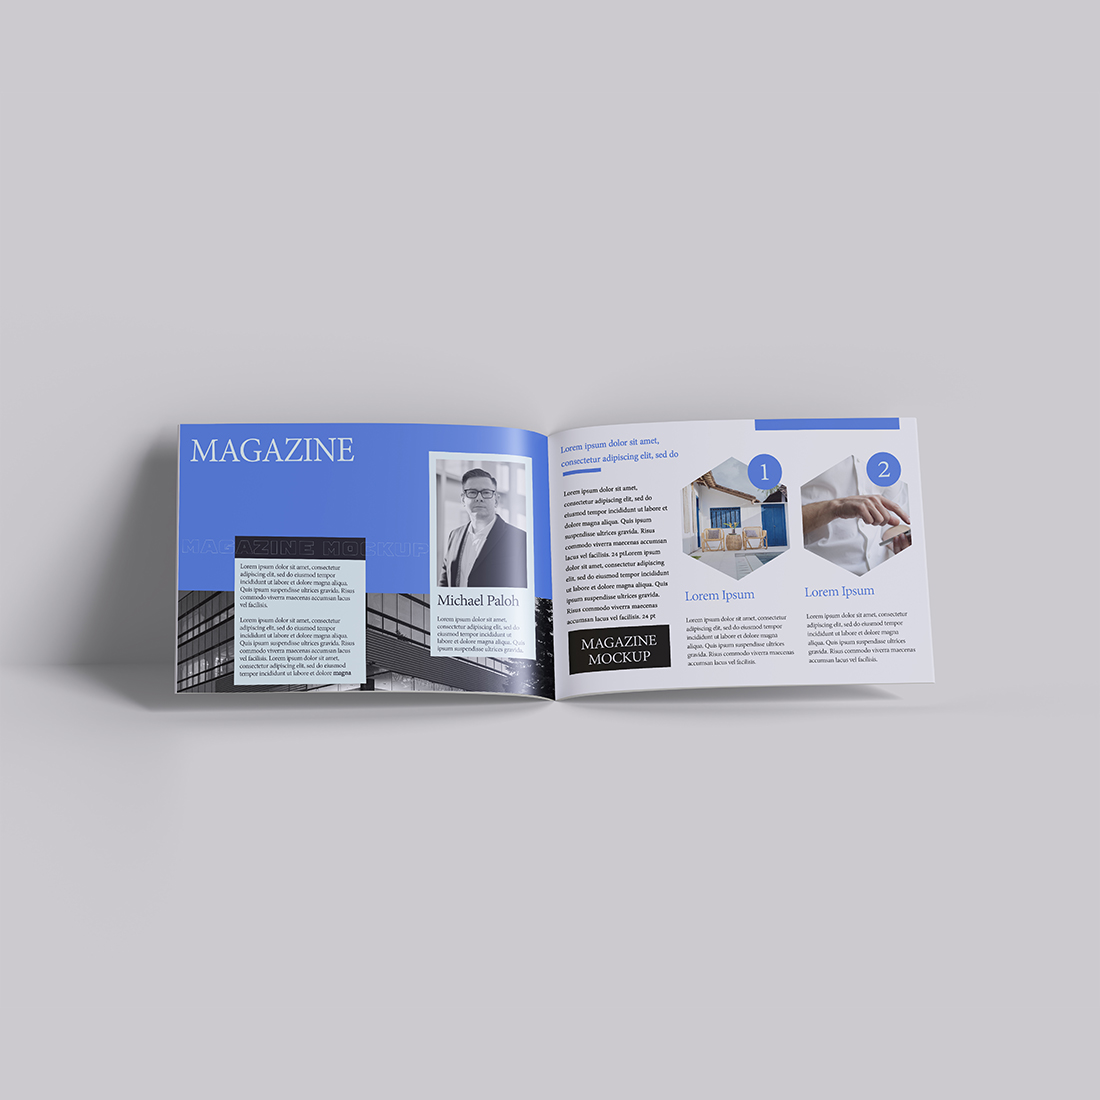 A4 Lanscape Magazine Mockup Realistic Render and with a Blender 3D software preview image.